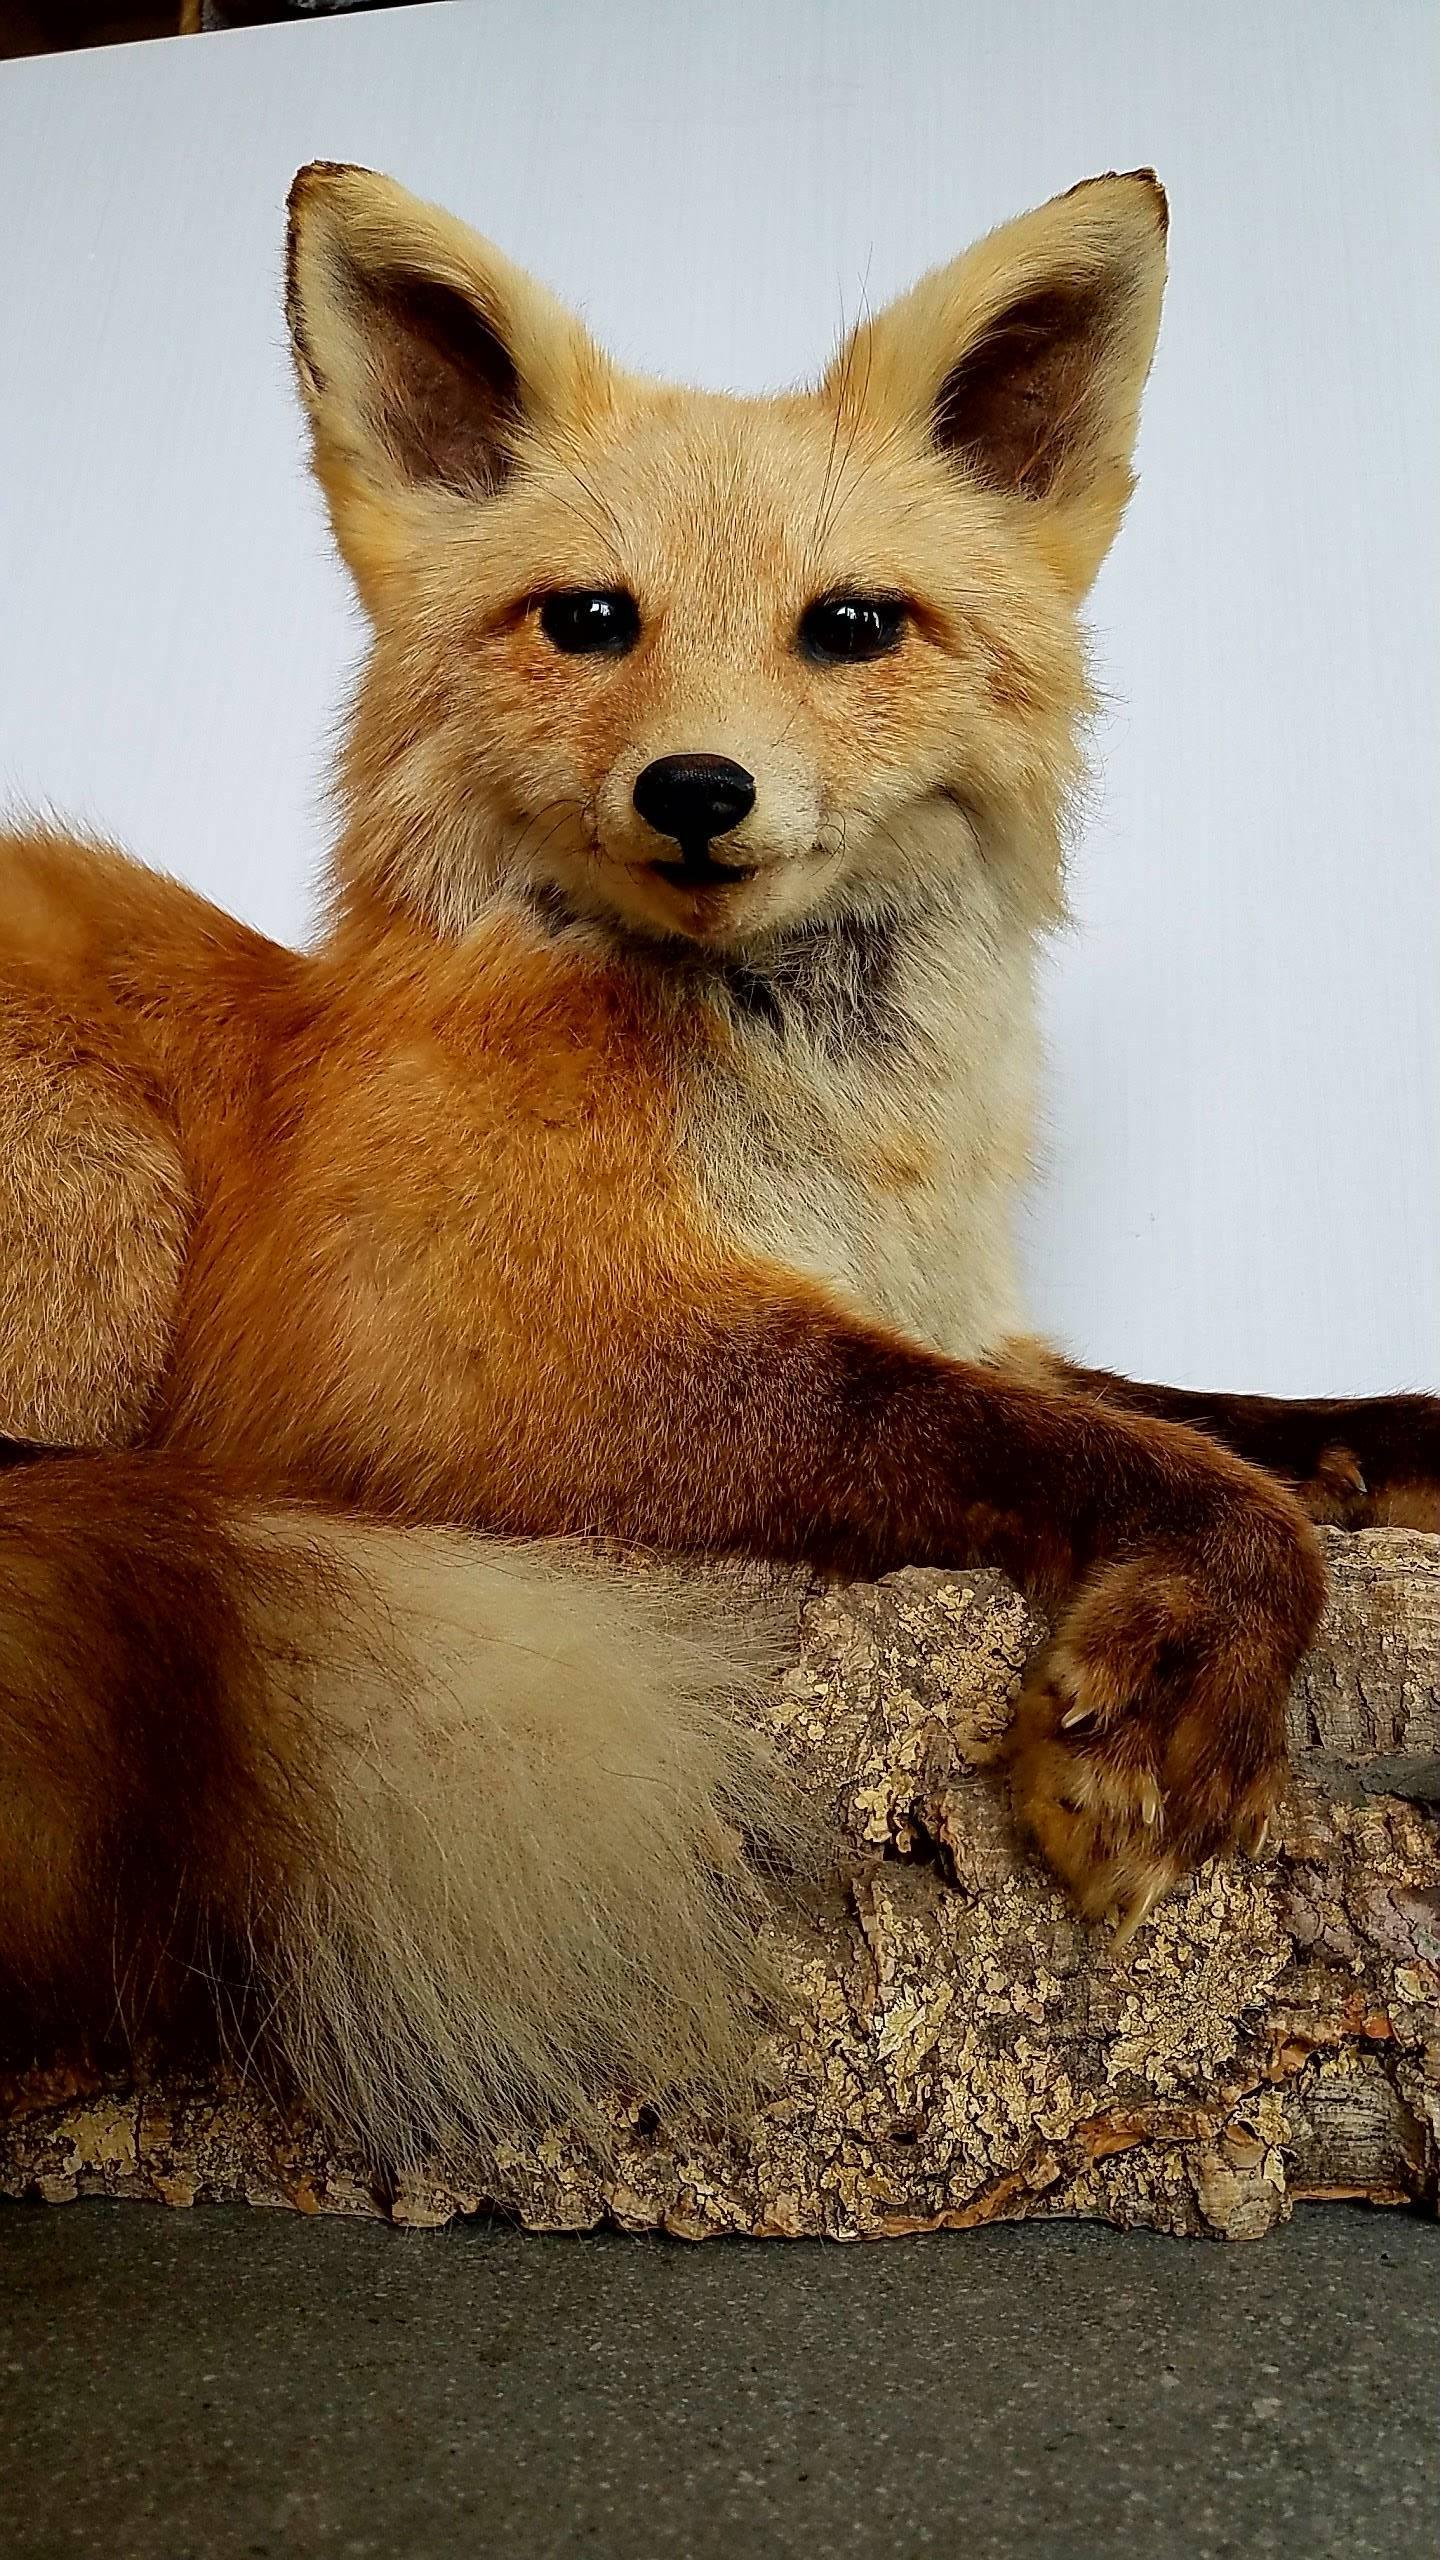 Incredible Red Fox Taxidermy. Superior condition and demeanor. A stunning specimen on a large cork bark base.  Mounted seamlessly with great expertise.  Fur is in perfect condition and the expression is extremely lifelike.